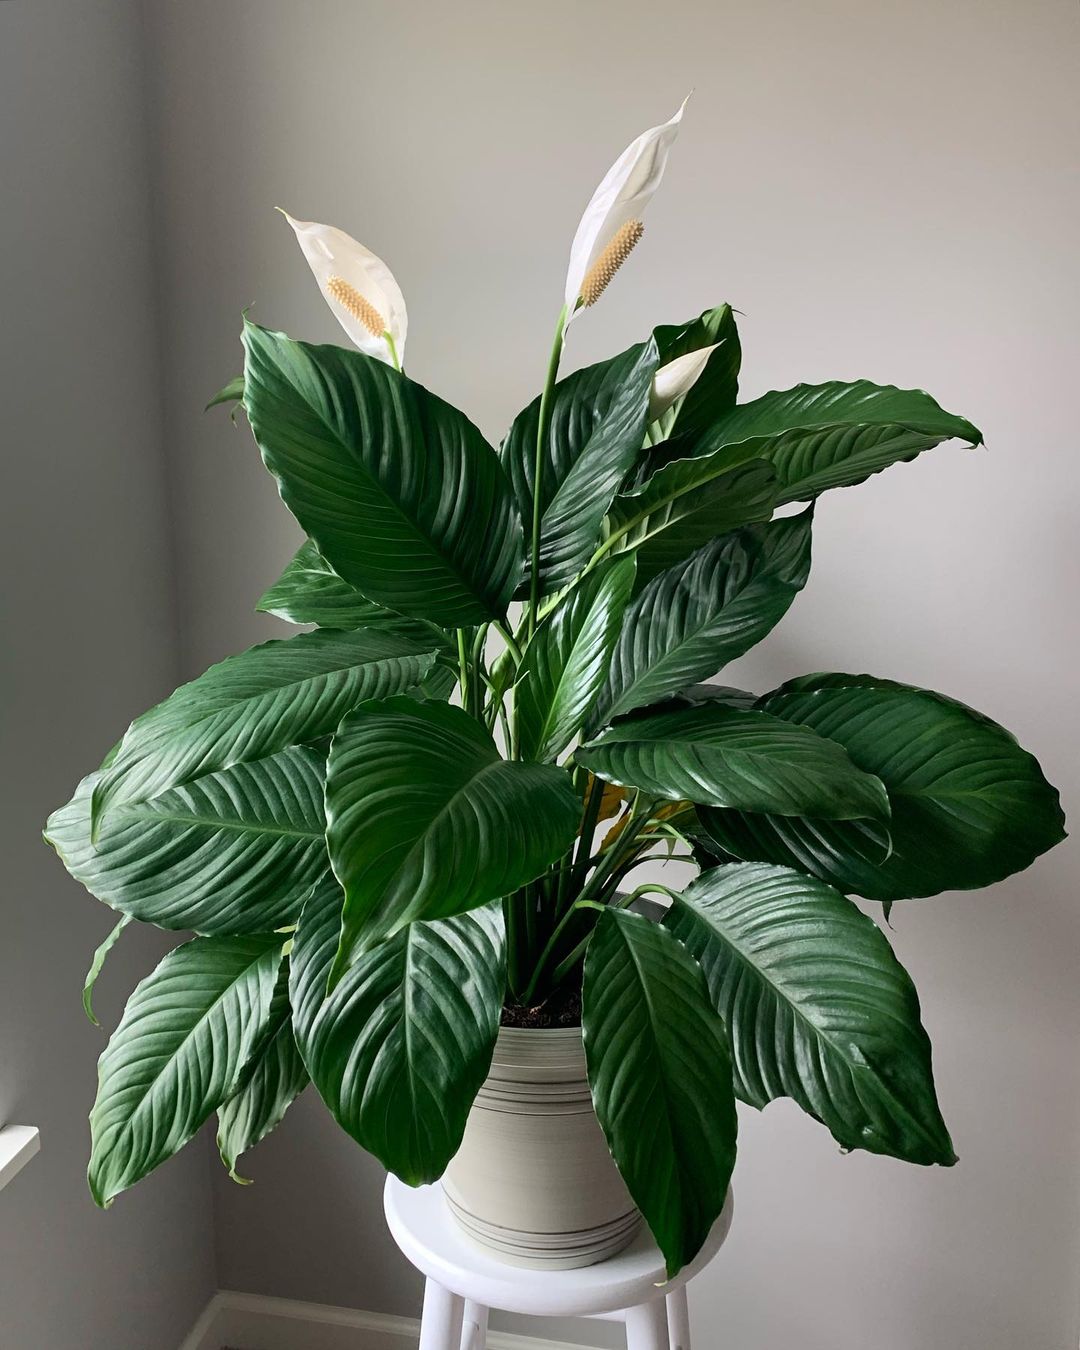 Blooming peace lily. Photo by Instagram user @candiceayala.